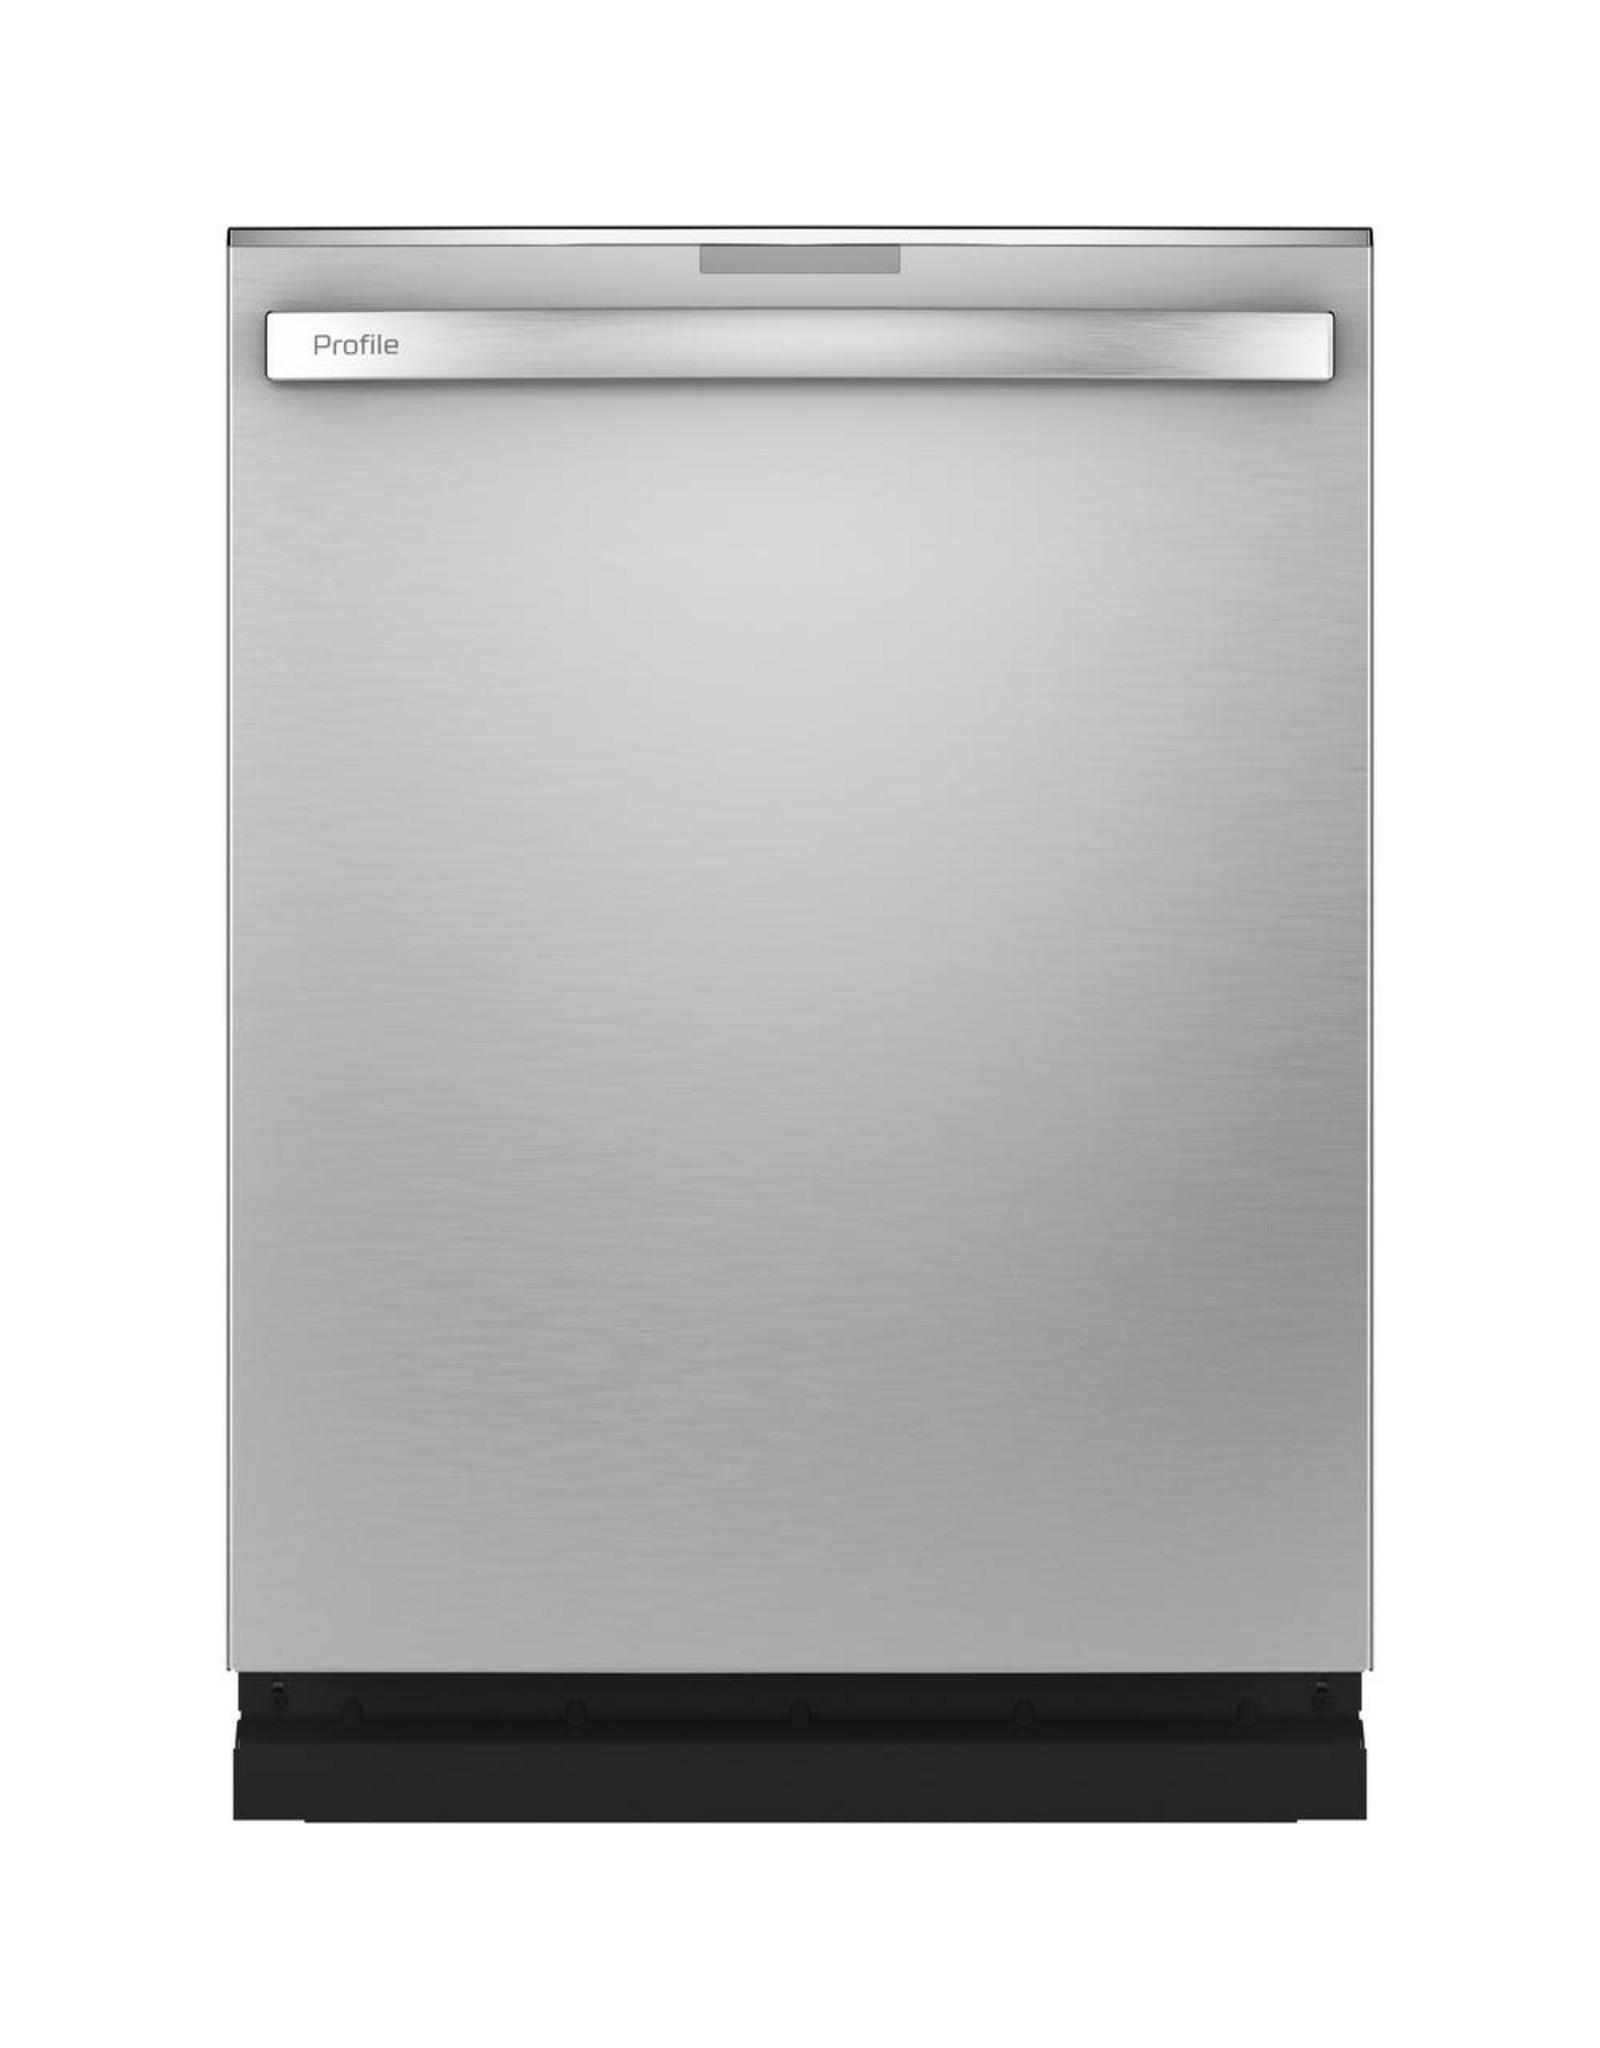 PDT715SYNFS Profile Top Control Tall Tub Dishwasher in Fingerprint Resistant Stainless Steel with Steam Cleaning, 45 dBA